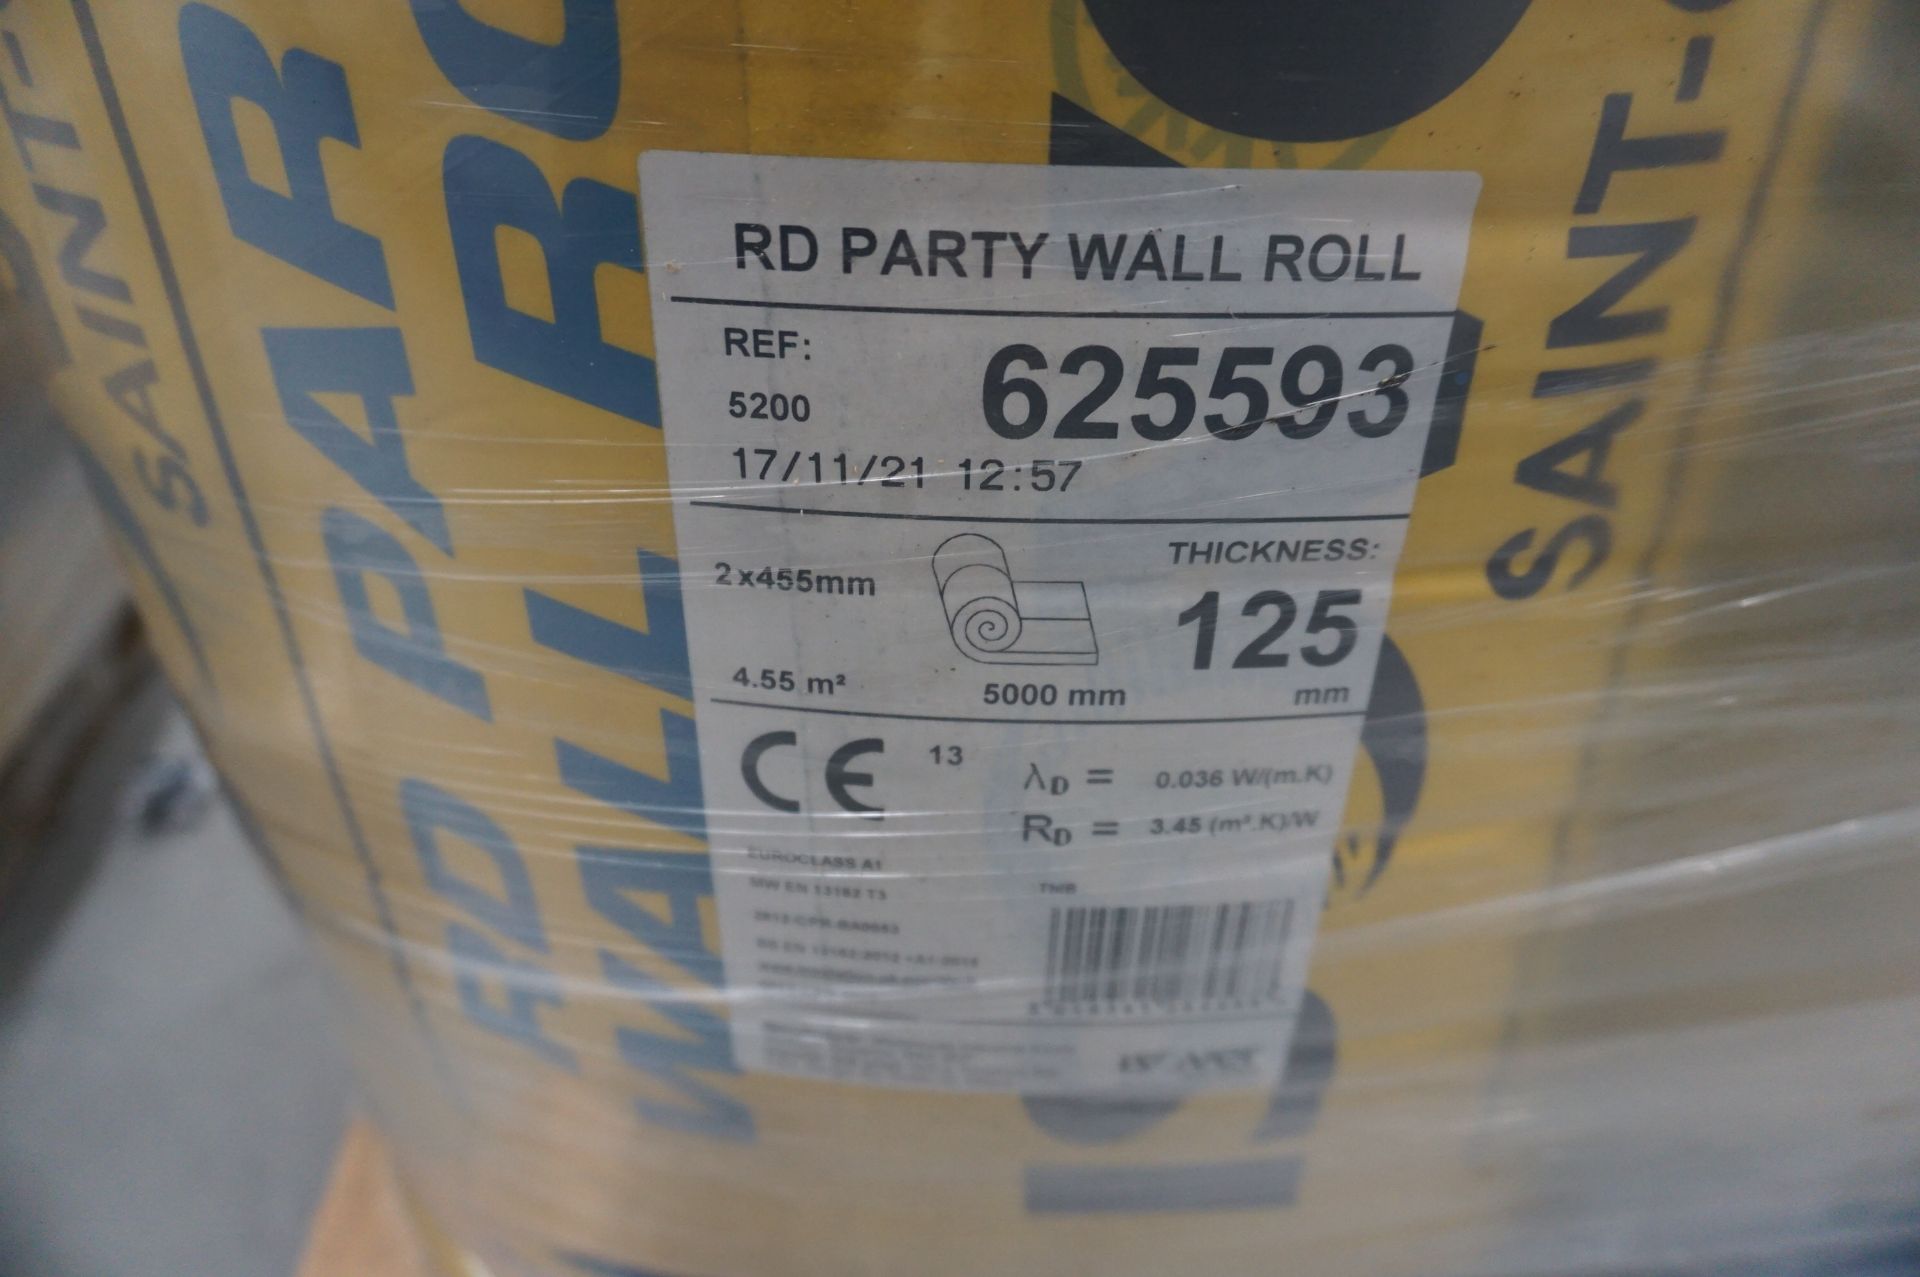 24x (no.) rolls Isover Saint Gobain, RD party wall acoustic insulation, 2x 455mm x 5000mm x 125mm ( - Image 2 of 3